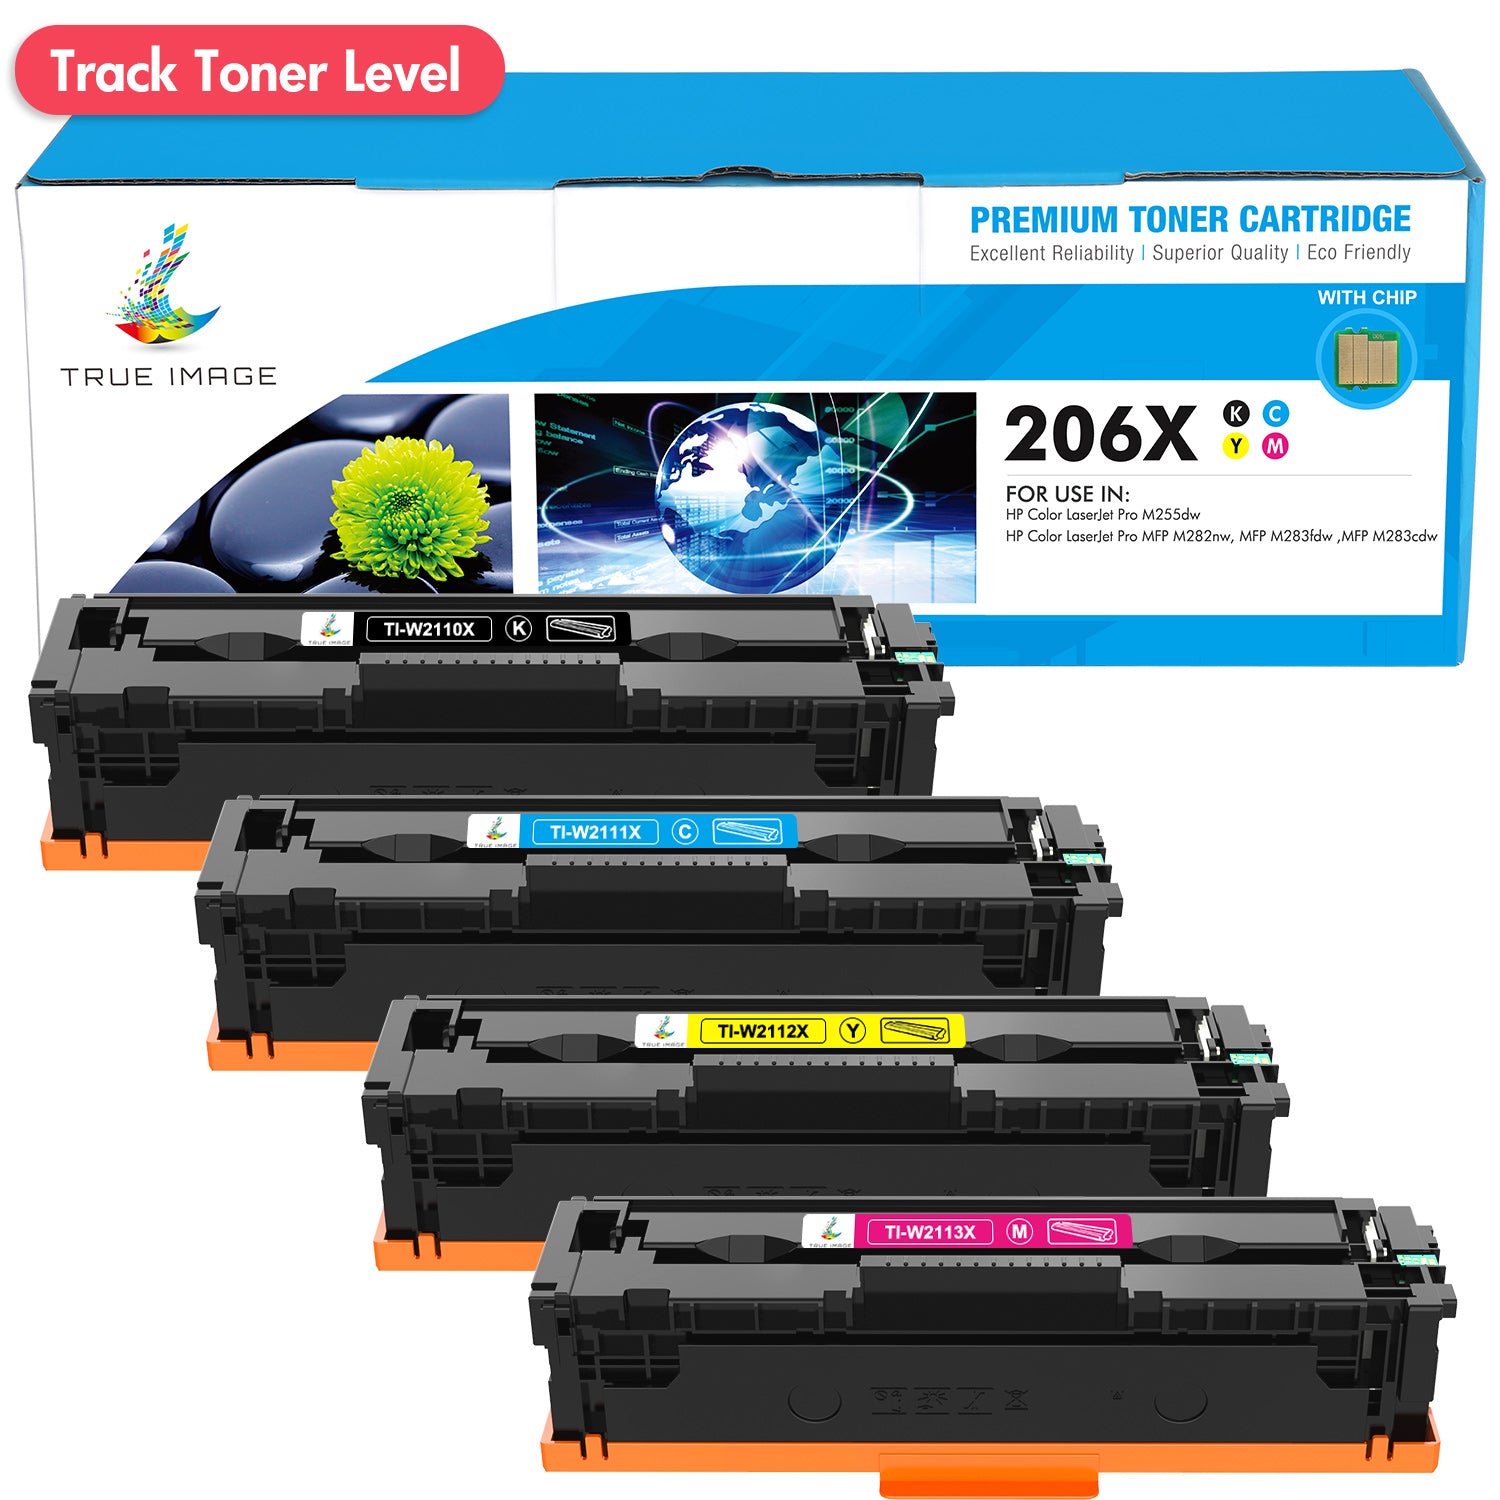 HP 206X Toner Set of 4 - With Latest Chip